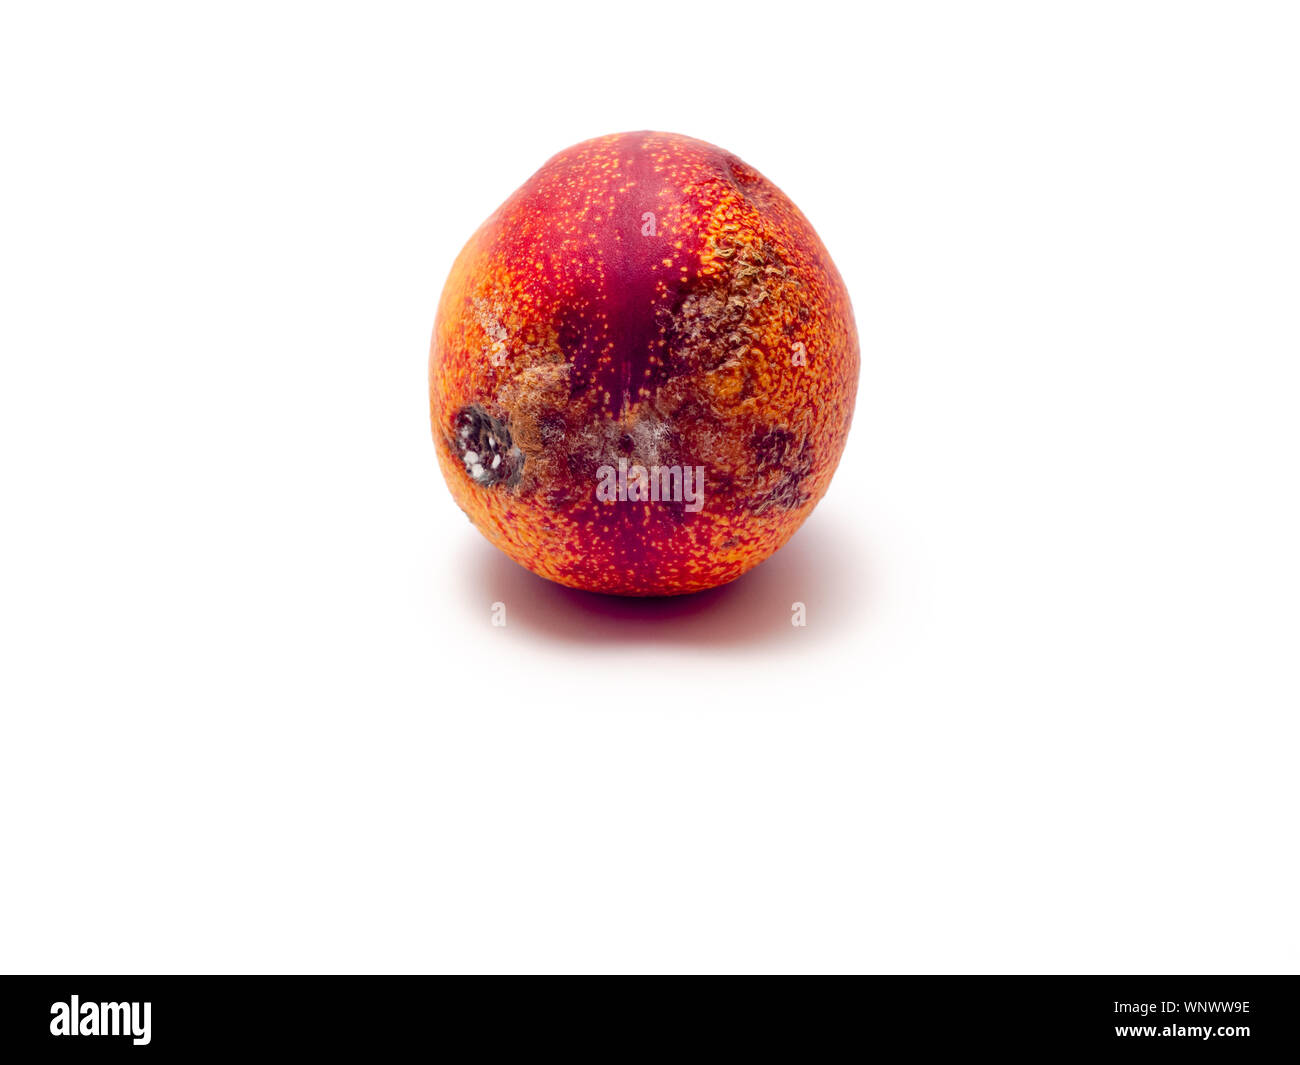 Single rotten nectarine with white fungus on skin isolated on white background. Selective focus. Stock Photo